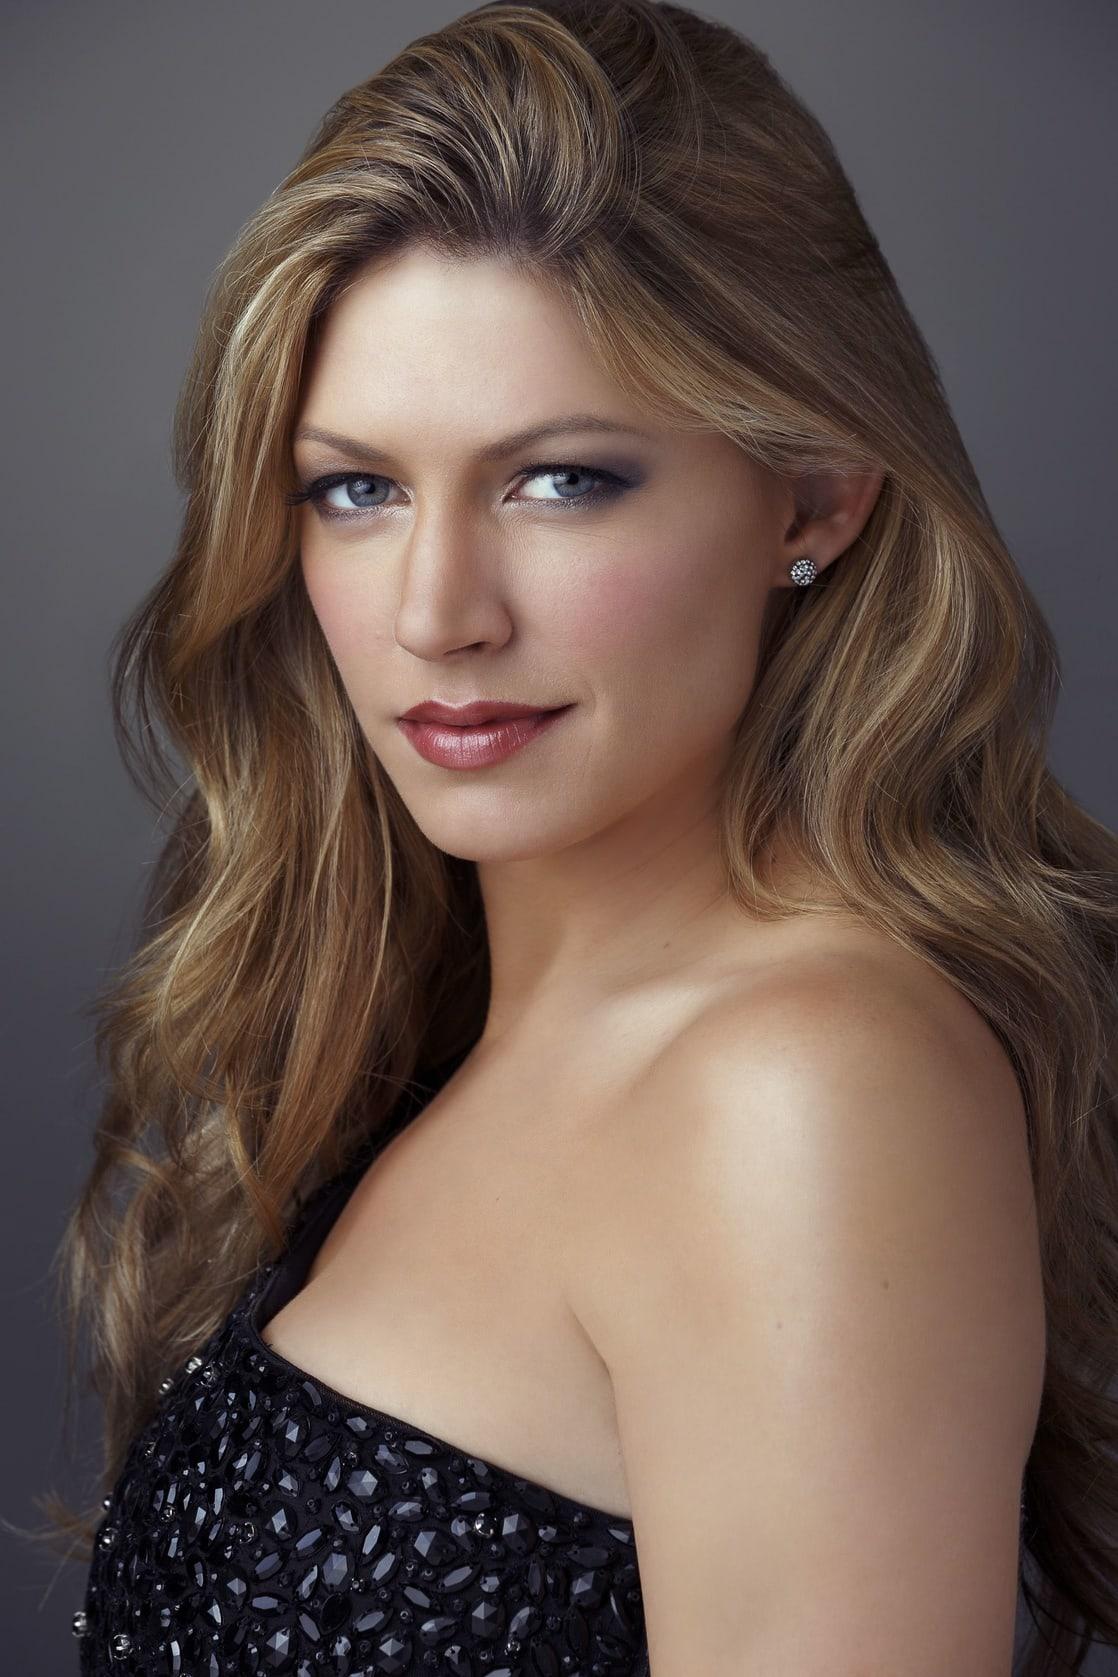 33 Hot Pictures of Jes Macallan – Ava Sharpe In Legends Of Tomorrow | Best Of Comic Books